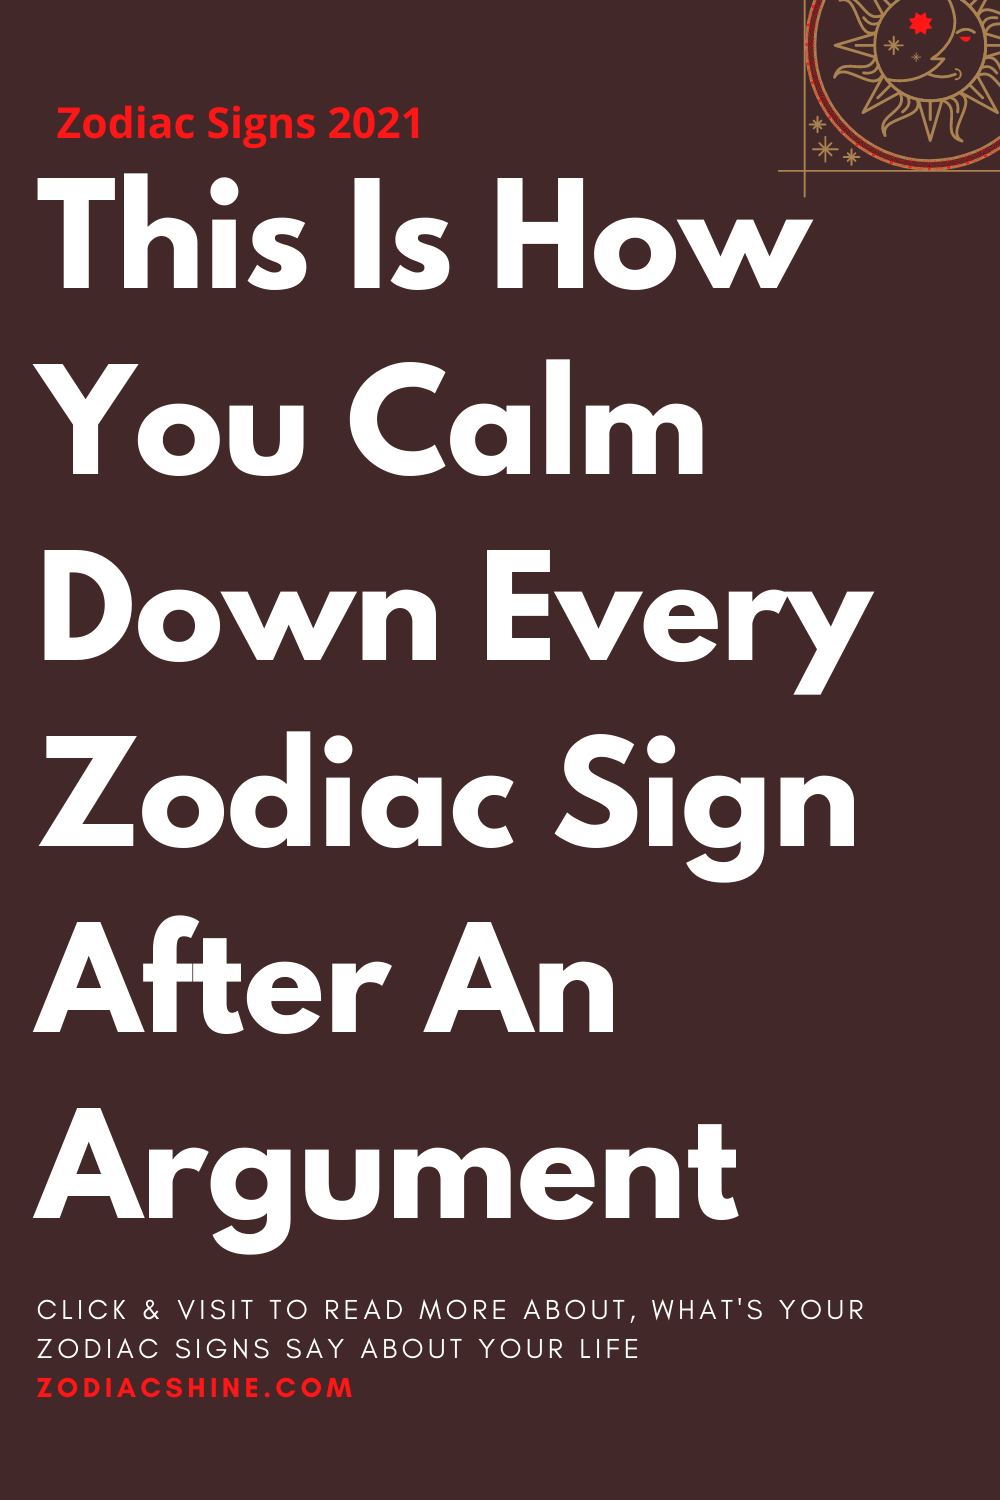 This Is How You Calm Down Every Zodiac Sign After An Argument